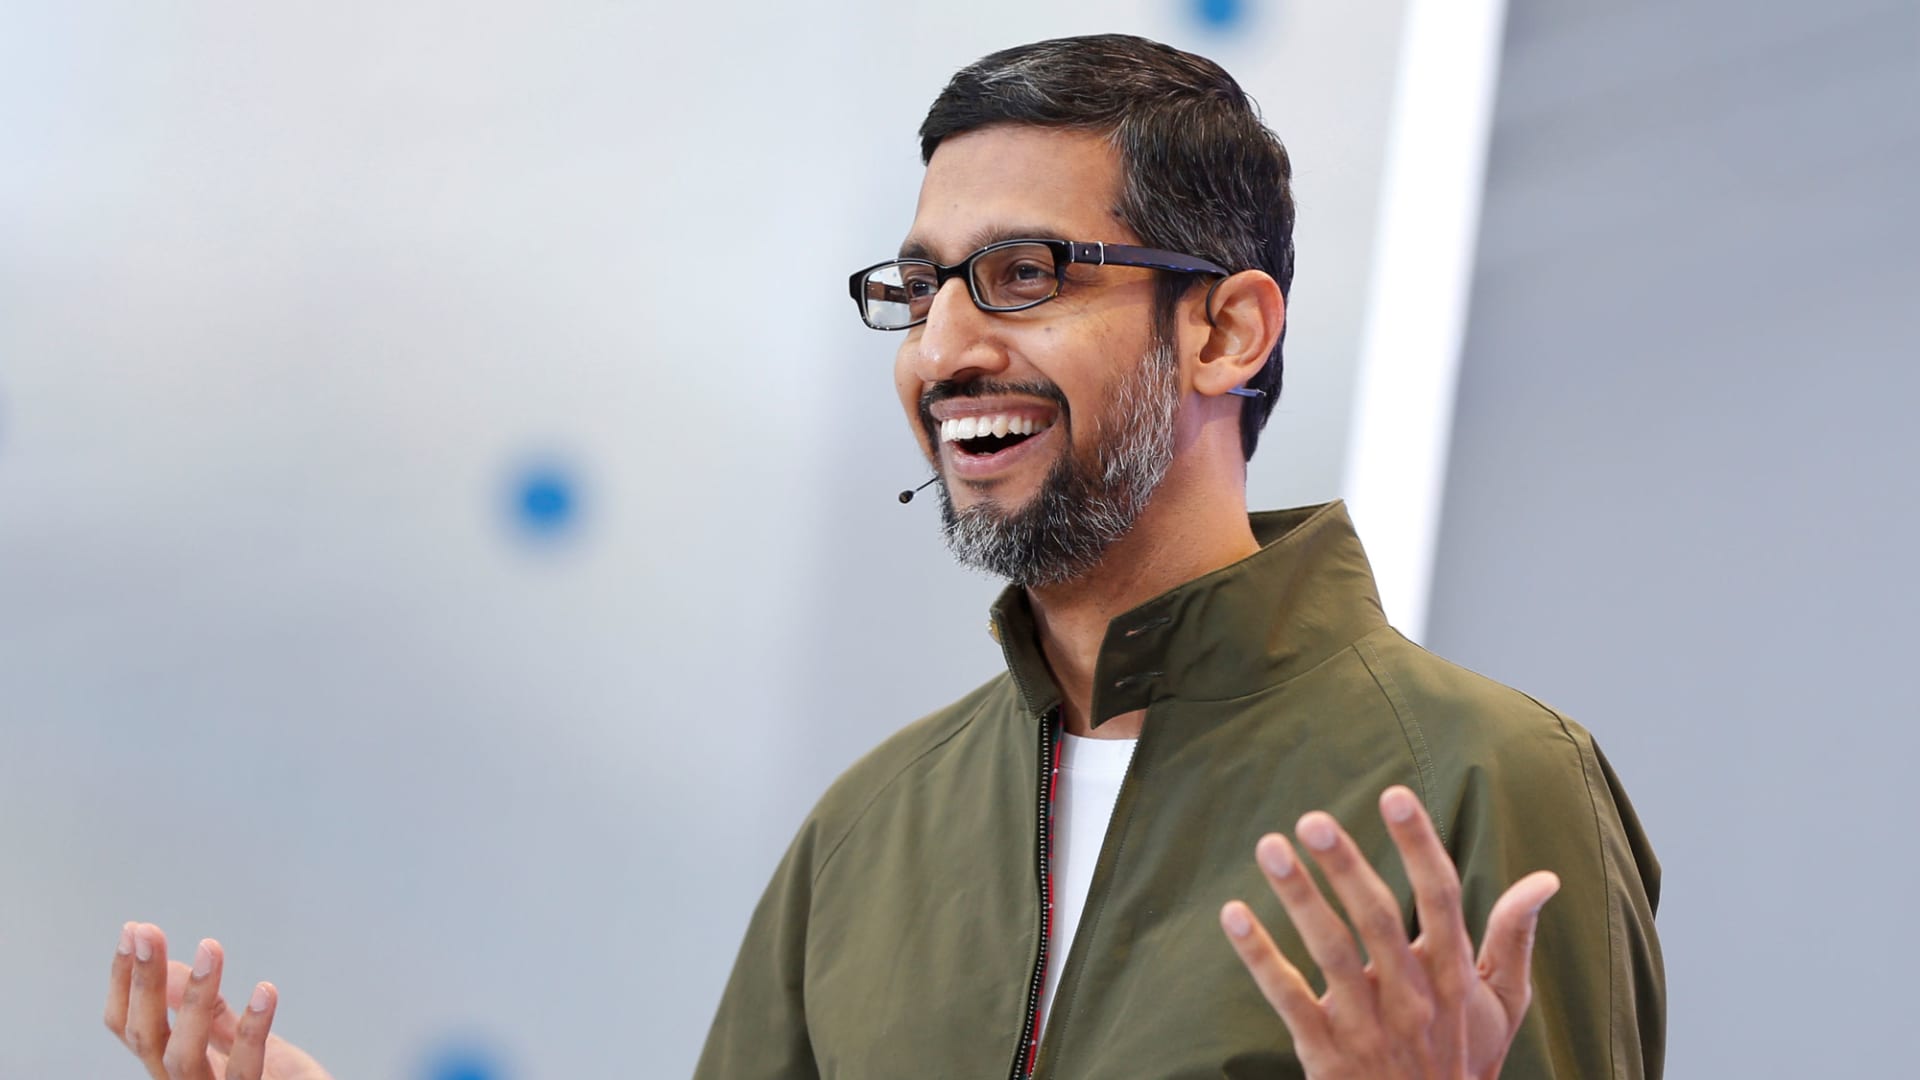 Google stock jumped 10% this week, fueled by cloud, ads and hope in AI